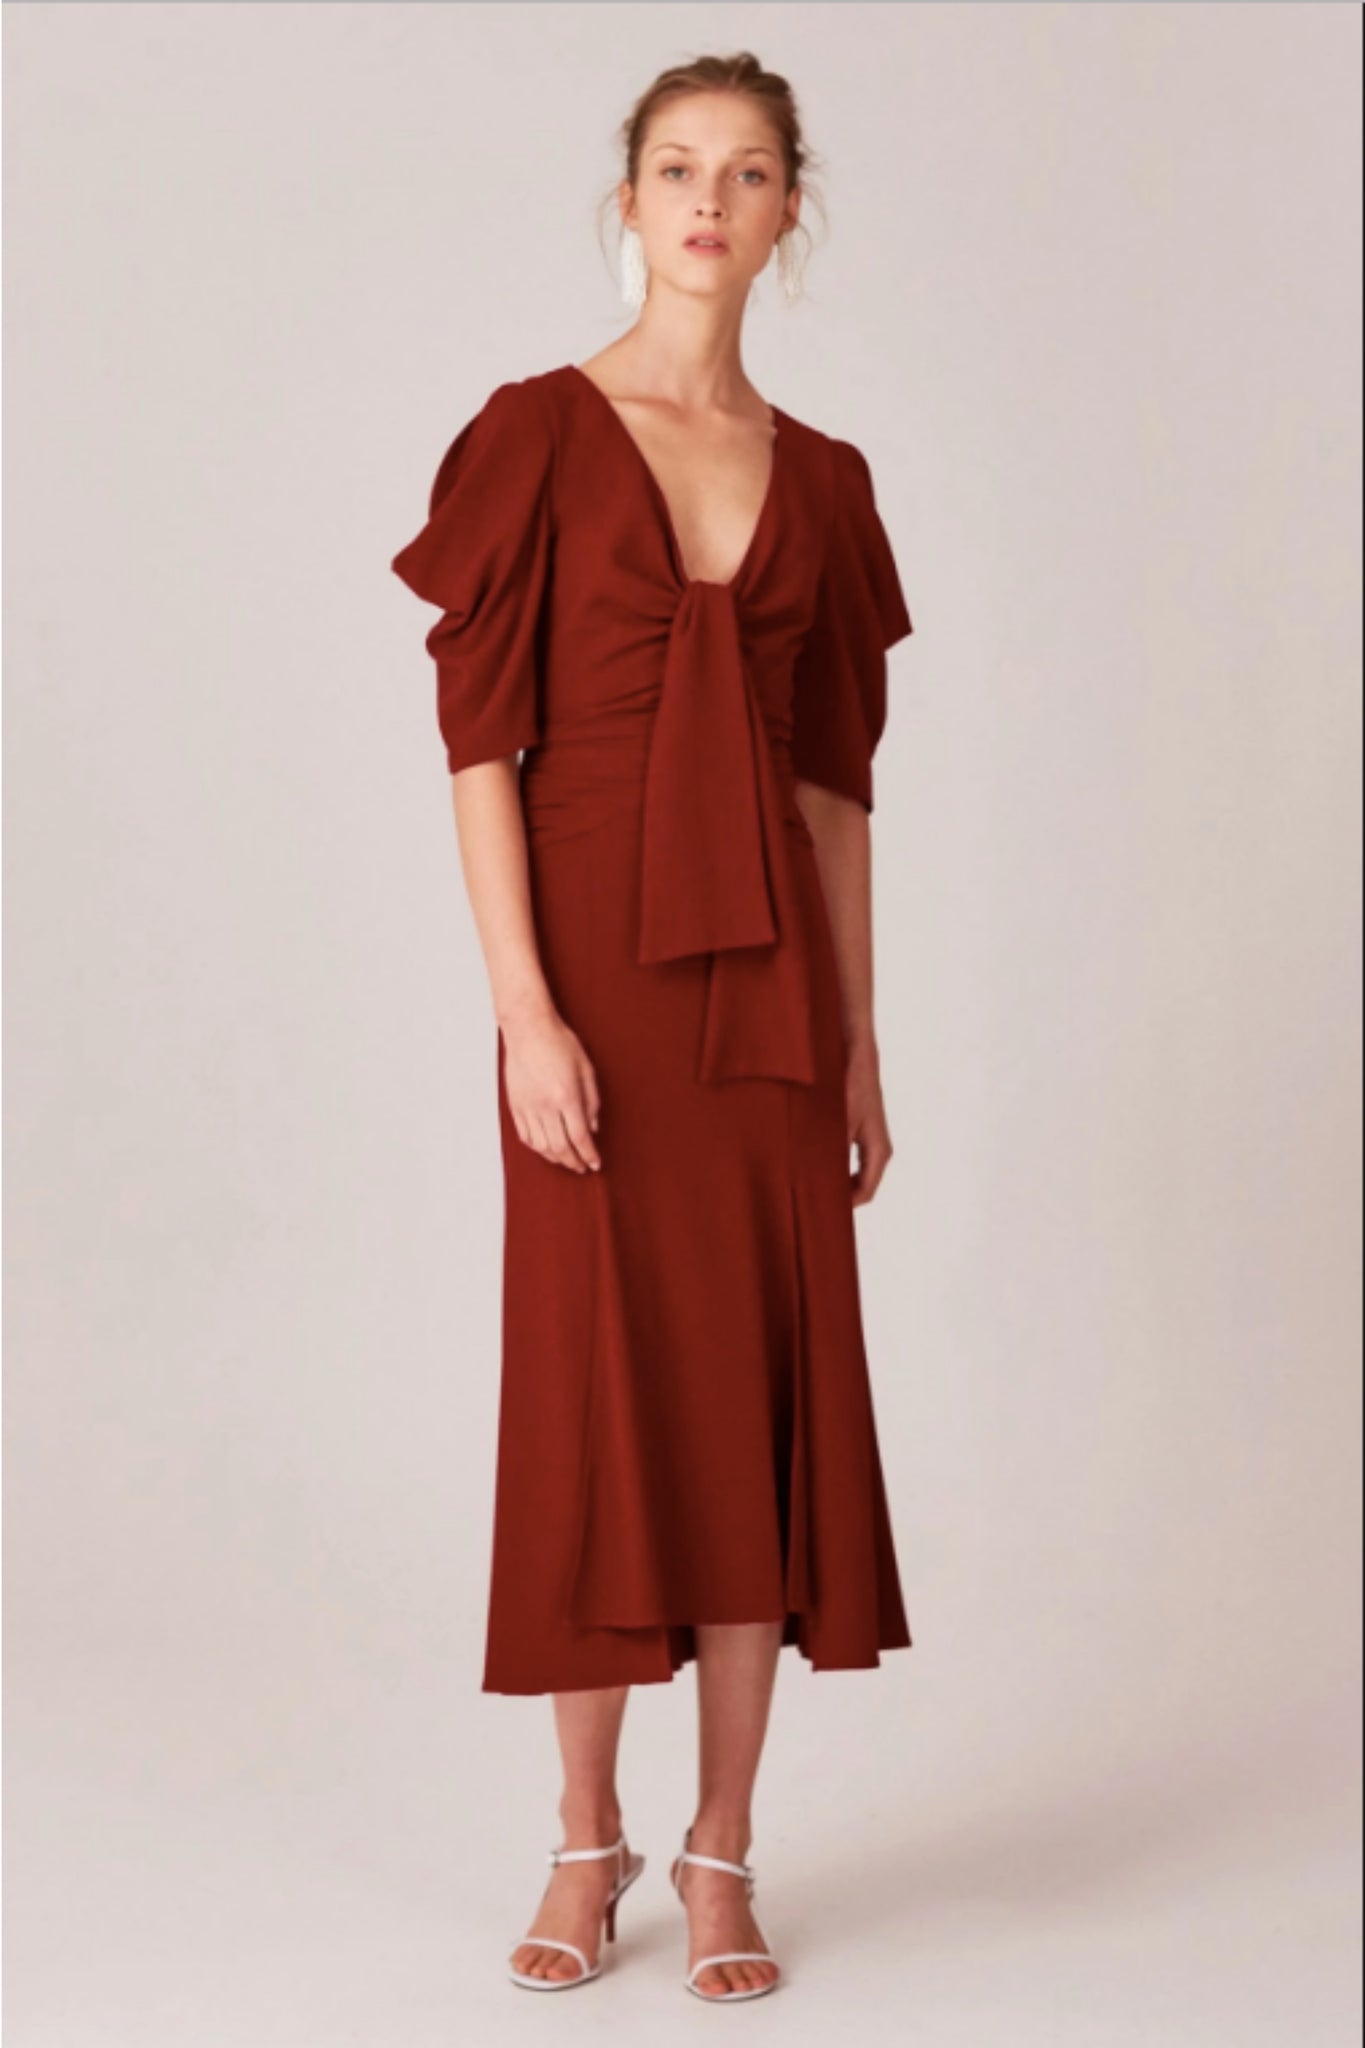 Buy C/MEO COLLECTIVE Willing Midi Dress in Berry now at Smoke and Mirrors Boutique. Shop C/MEO COLLECTIVE Free Shipping Australia wide on all orders over $100. Shop C/MEO AfterPay. Shop C/MEO ZipPay. 